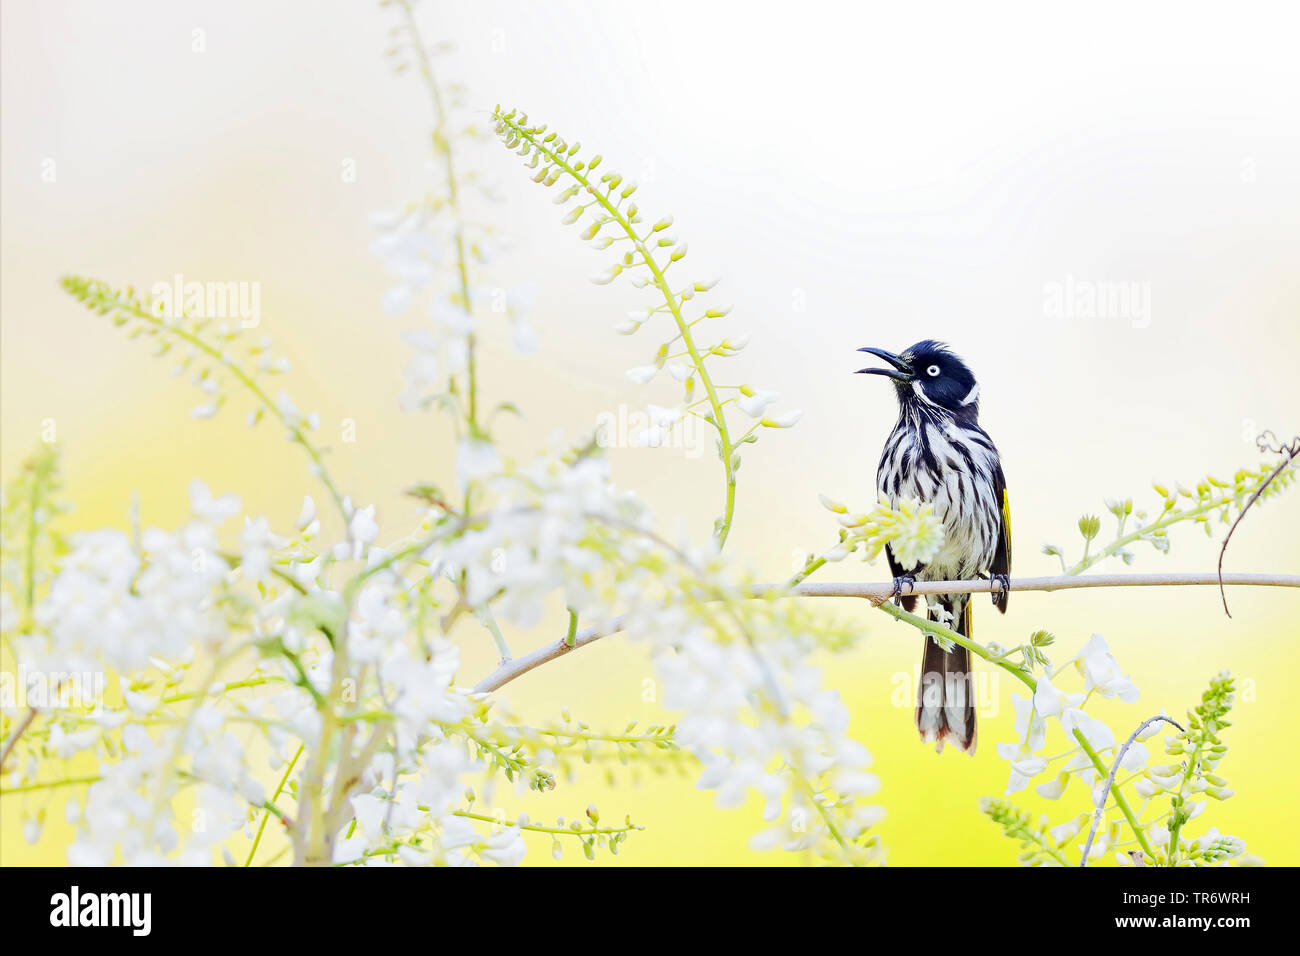 yellow-winged honeyeater (Phylidonyris novaehollandiae), singing from a bush with flowers in Western Australia., Australia, Western Australia, Donnybrook Stock Photo